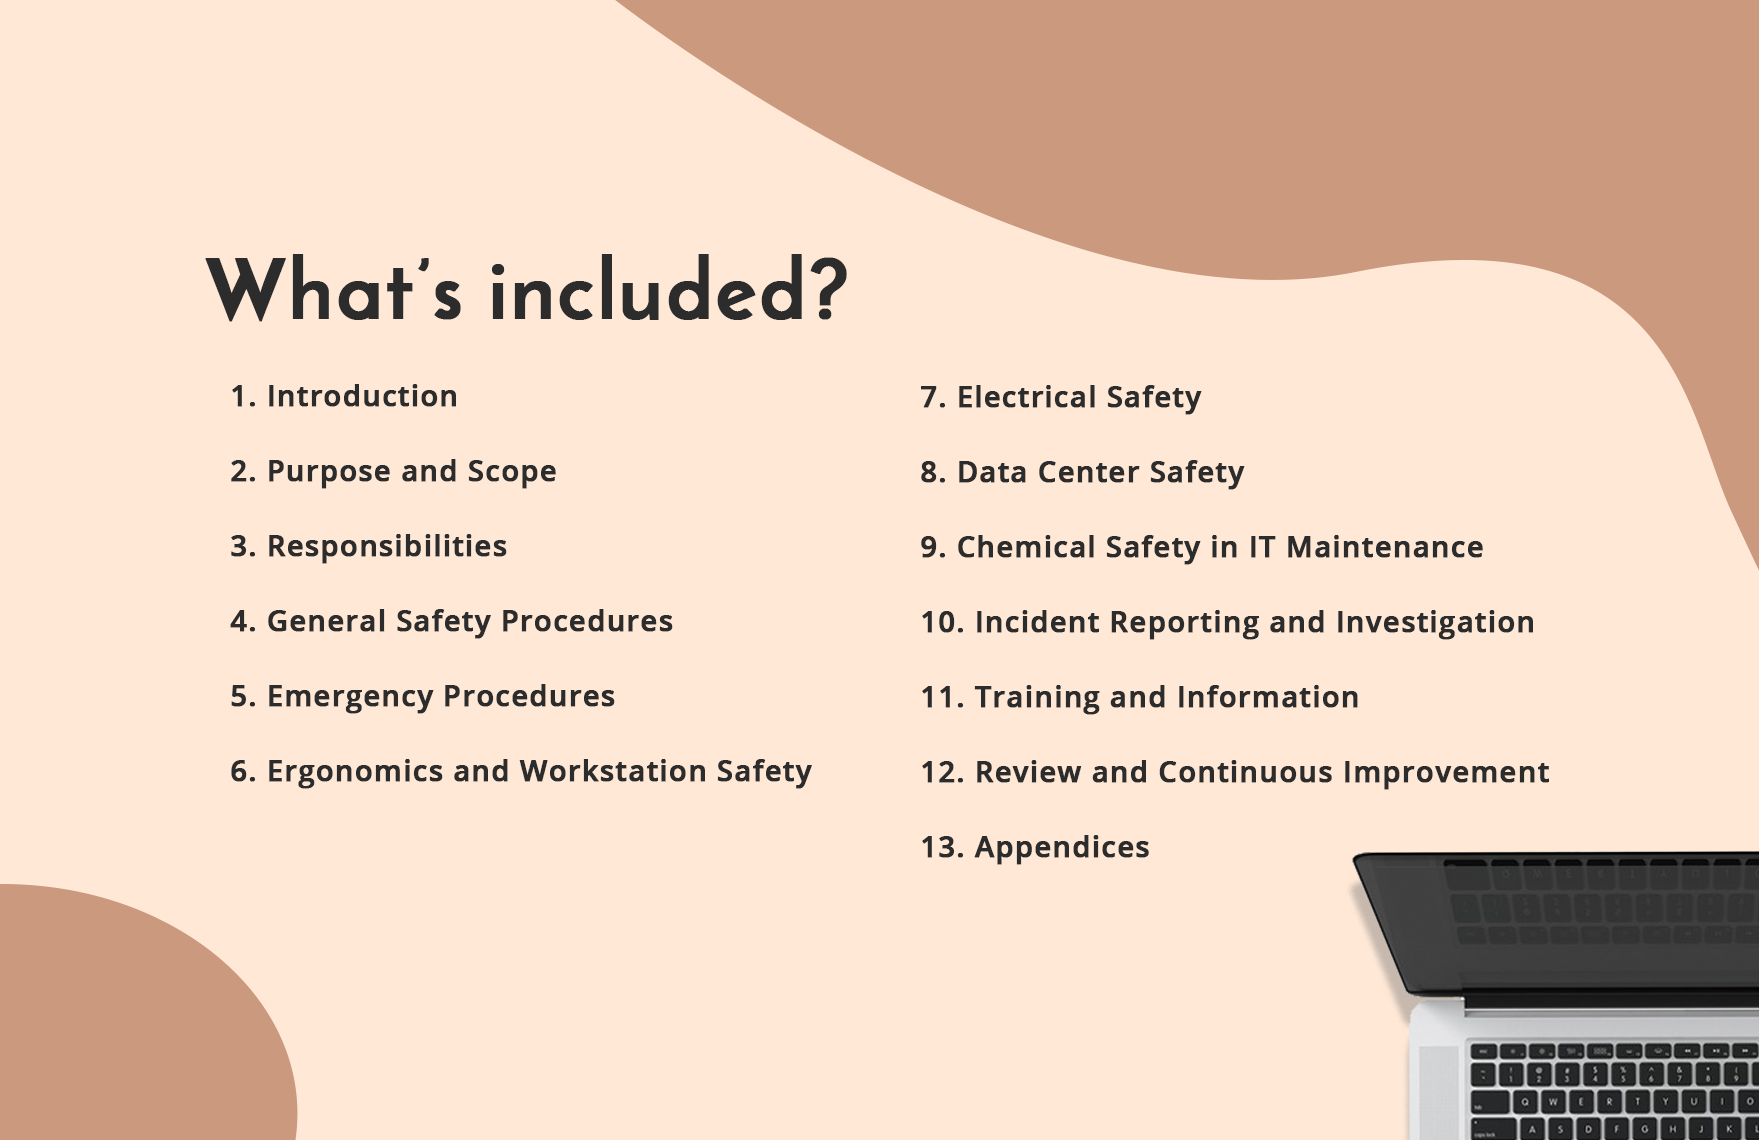 IT Occupational Health and Safety Manual Template